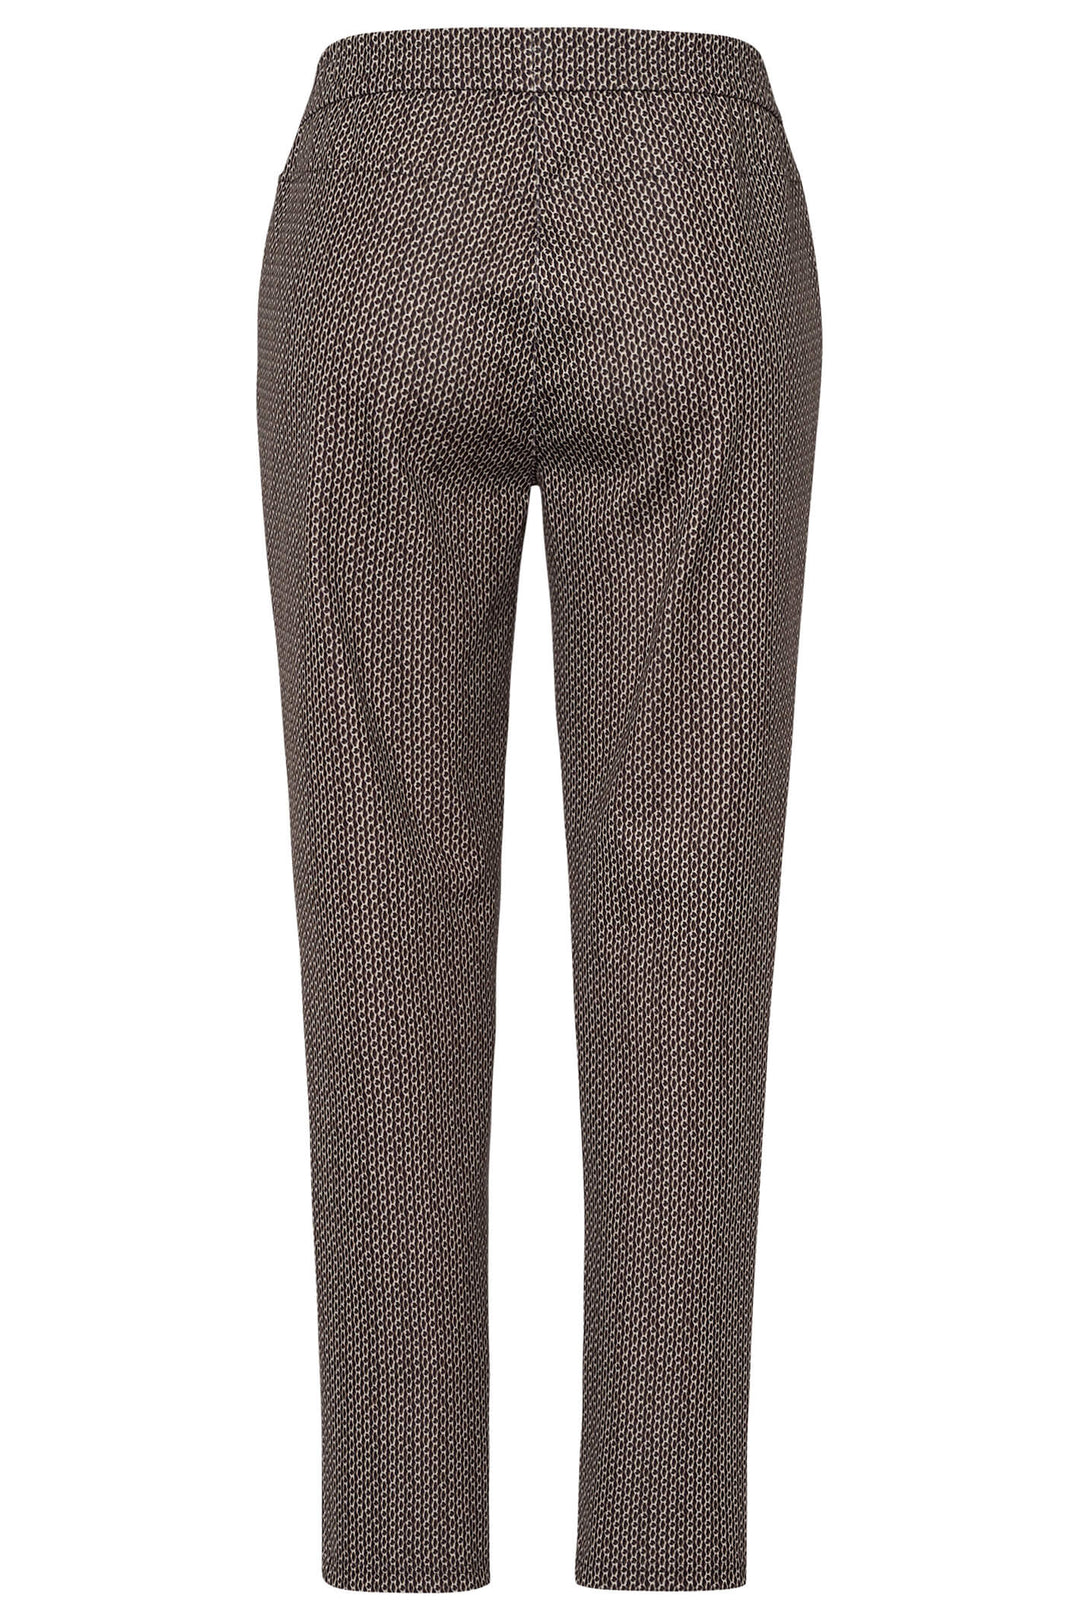 Frank Walder 209604 543 087 Brown Chain Link Print Pull-On Trousers - Shirley Allum Boutique